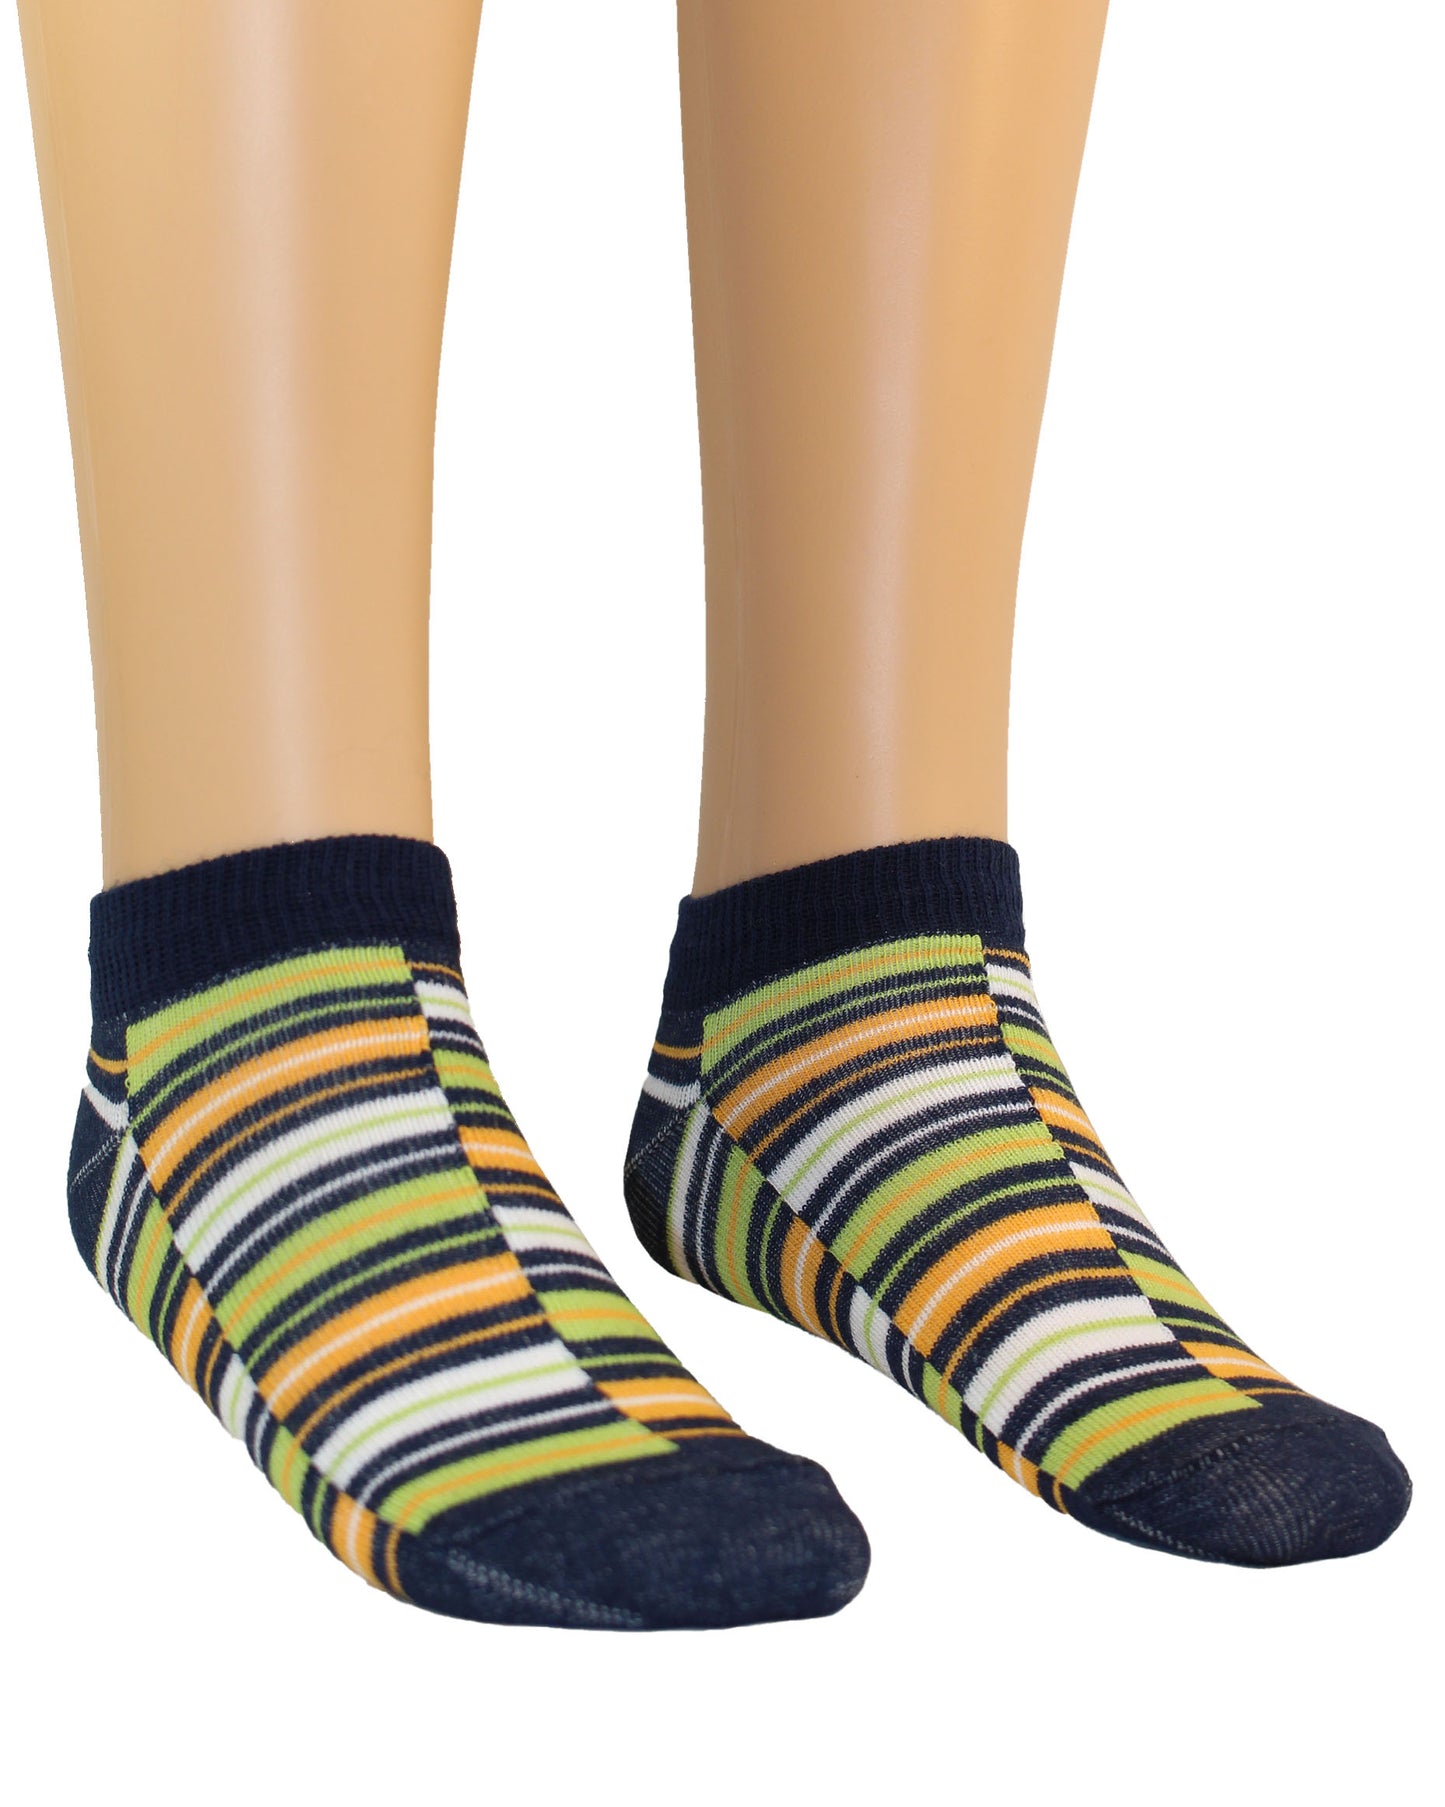 Omsa Serenella Harry Calzino - Kid's low ankle cotton sneaker ankle socks with a linear stripe pattern in navy, orange, lime green and white.